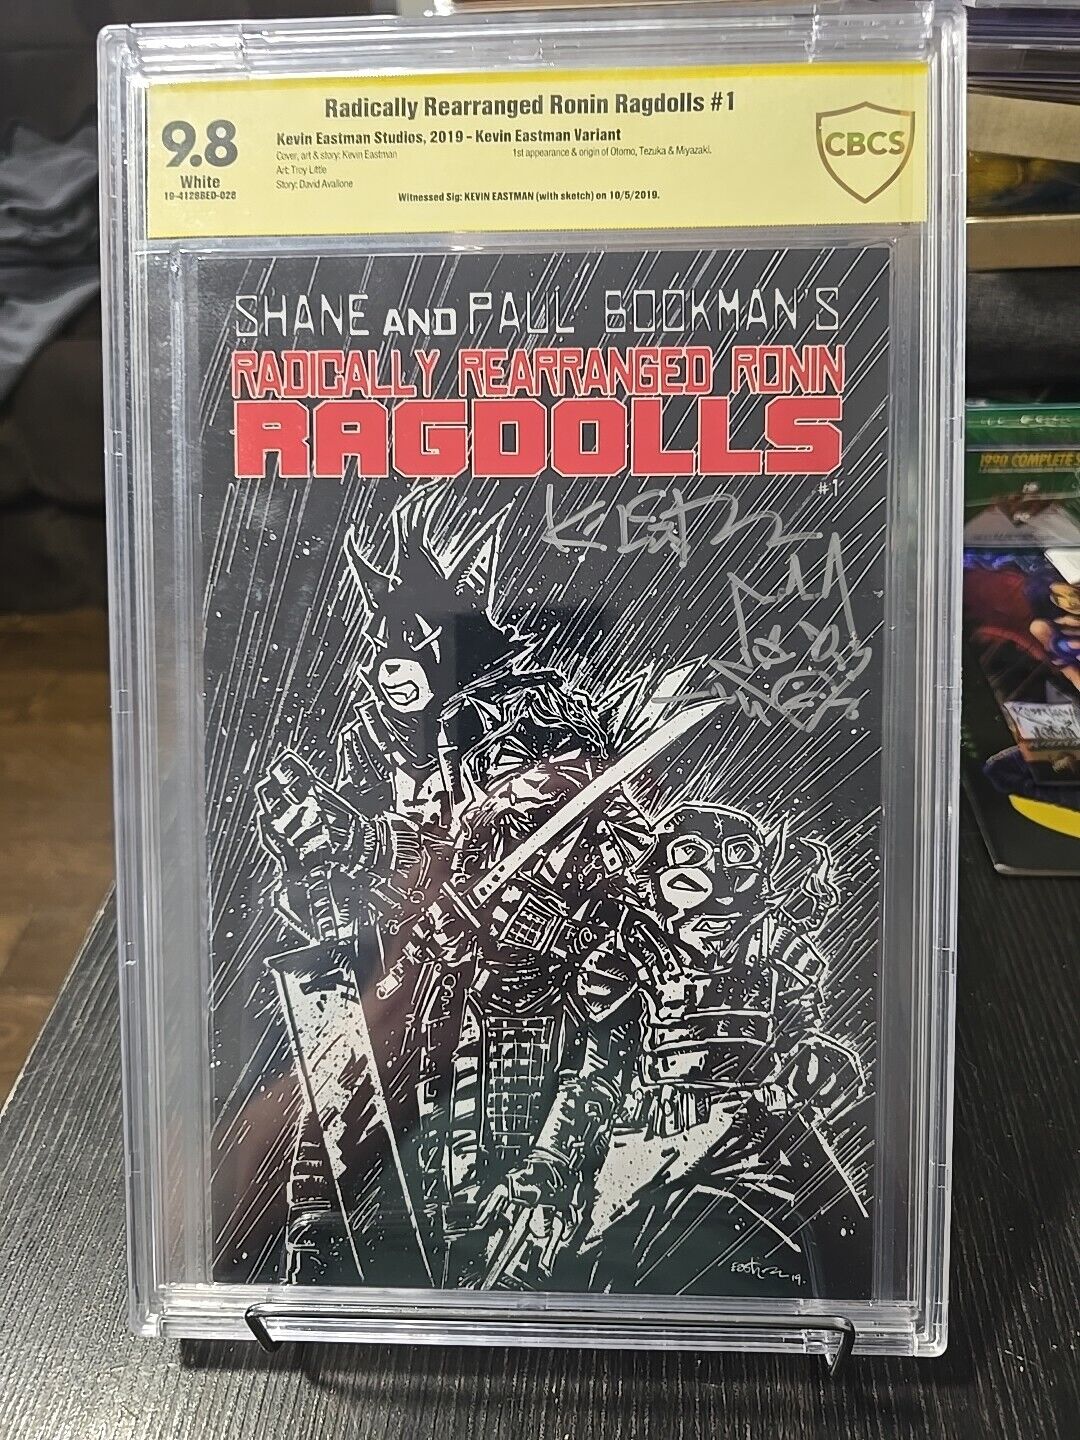 Radically Rearranged Ronin Ragdolls 2019 cbcs 9.8 SIGNED And Sketched By Eastman